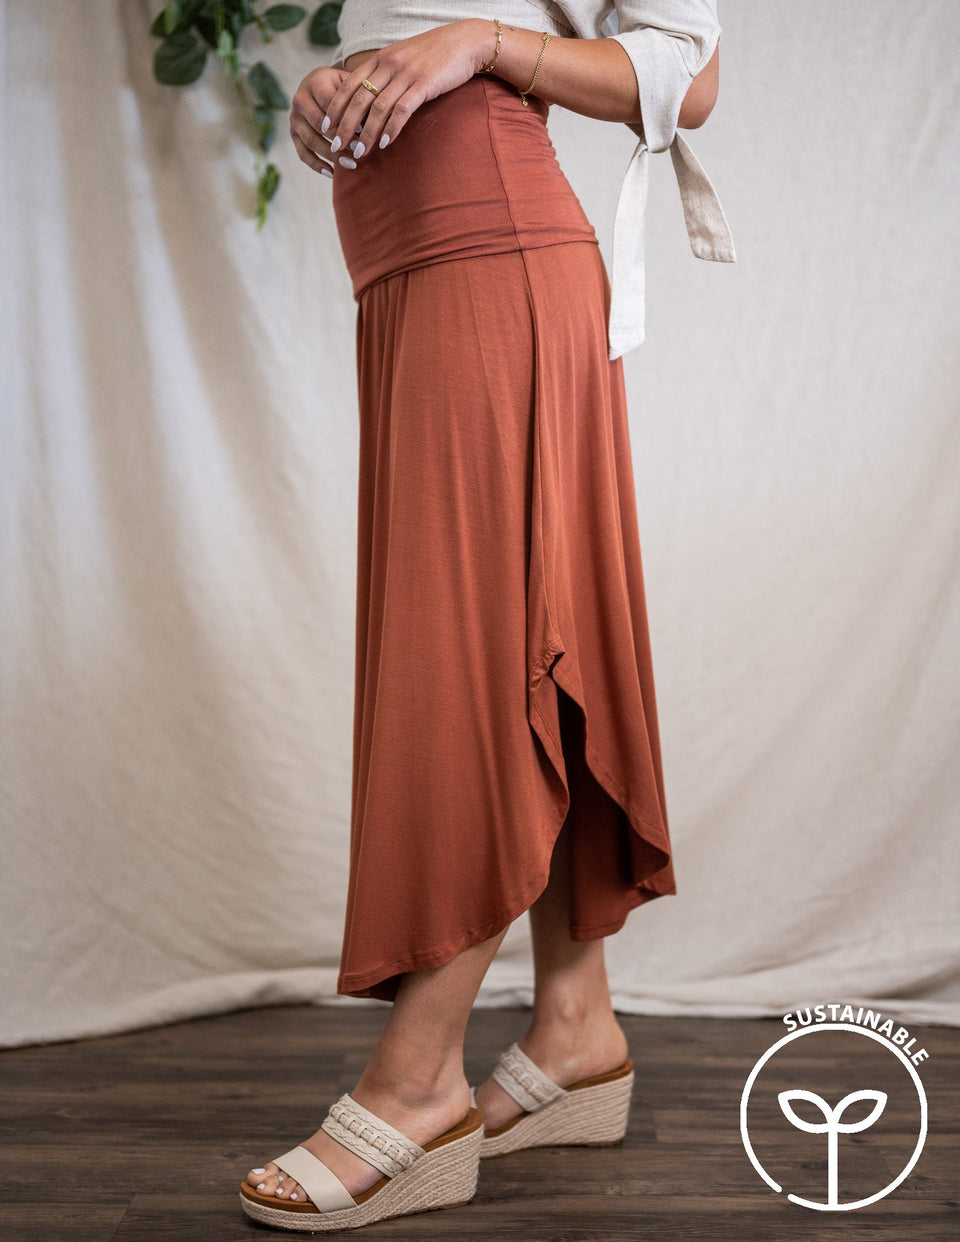 Hand Crafted Maxi Foldover/Yoga Skirt In Organic Cotton Or Bamboo